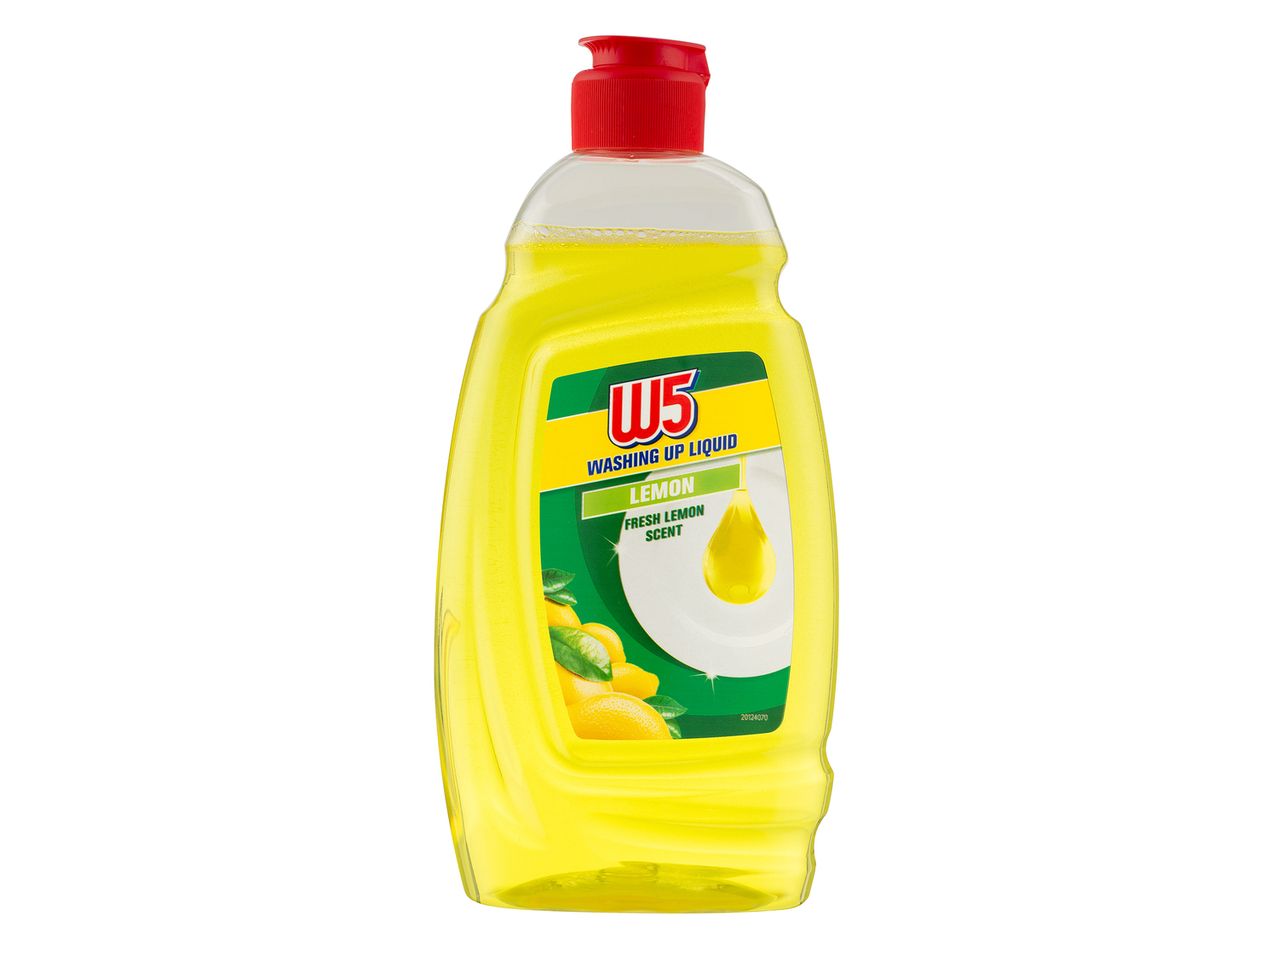 Go to full screen view: W5 Concentrated Washing Up Liquid - Image 2